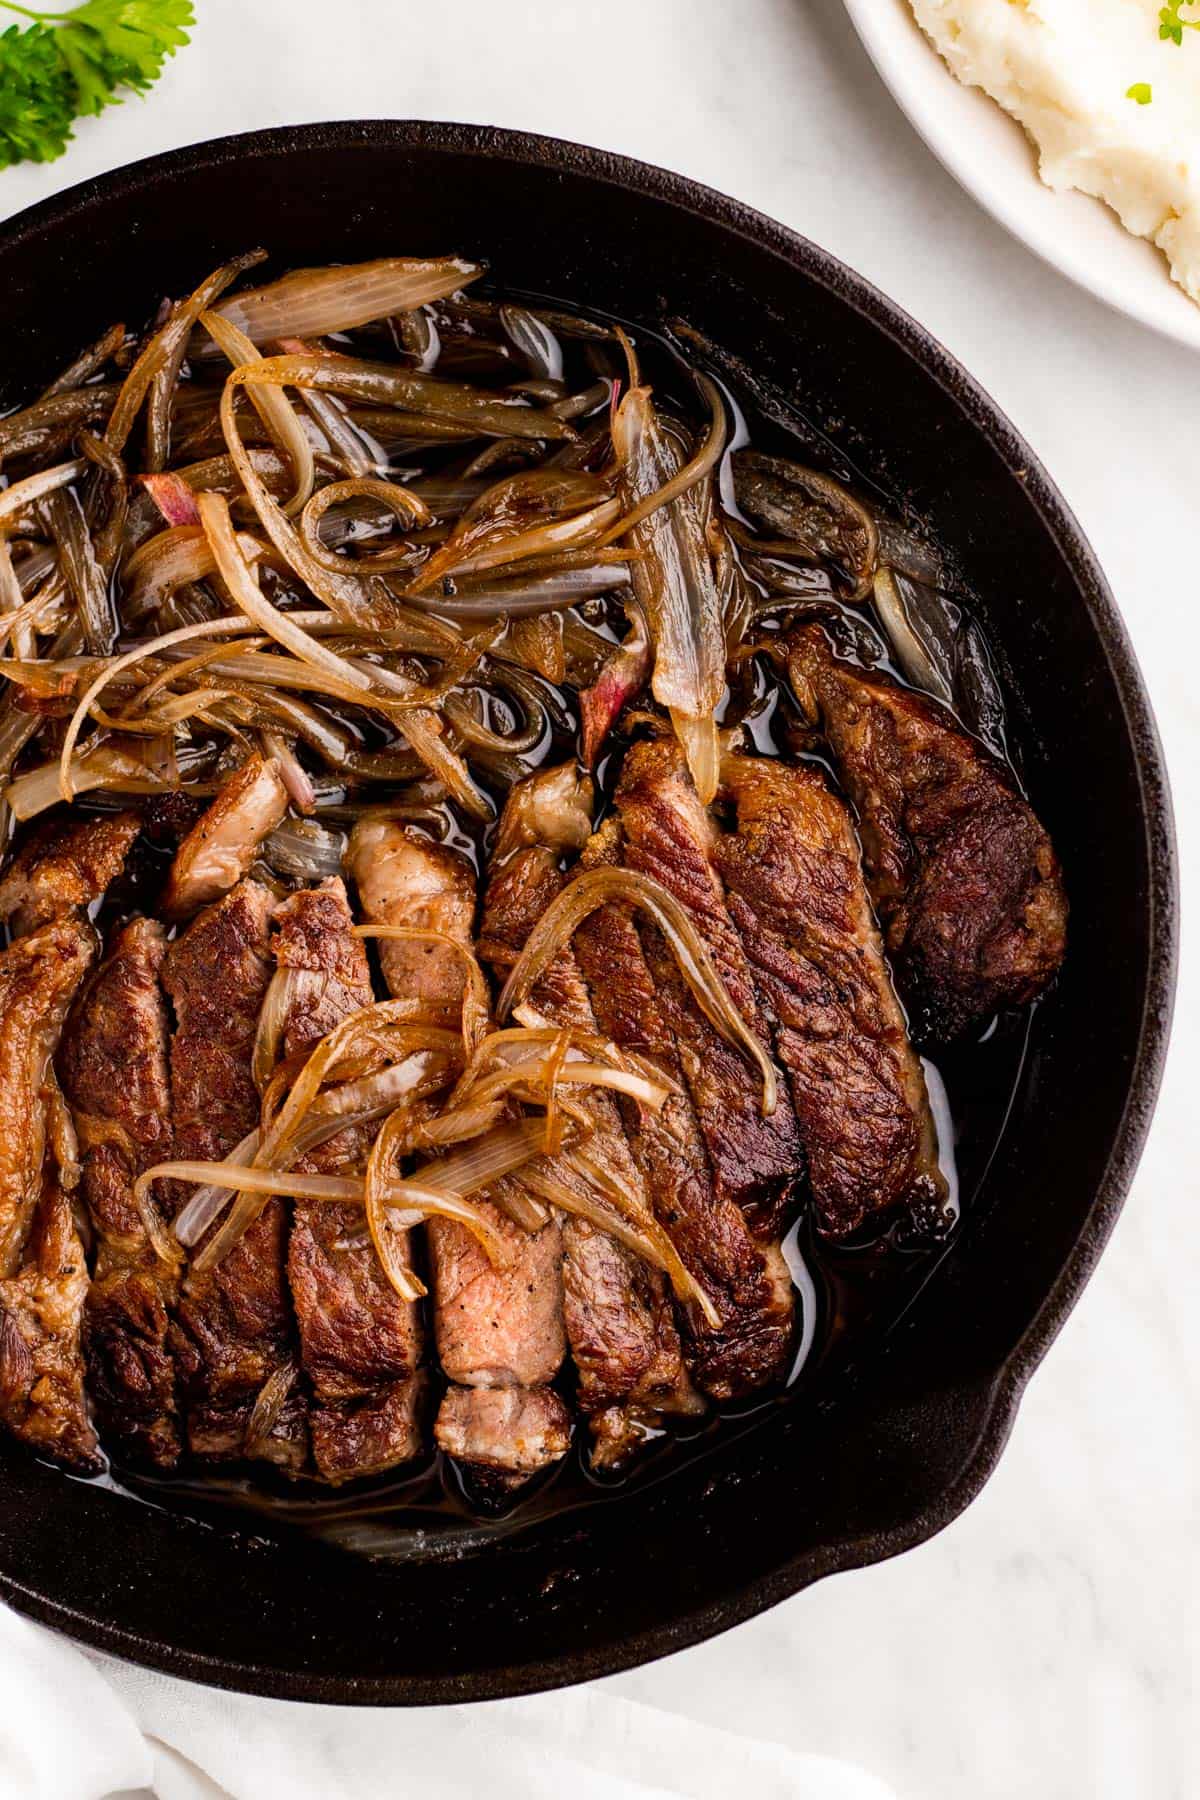 Black skillet with steak and shallots ready to be served.